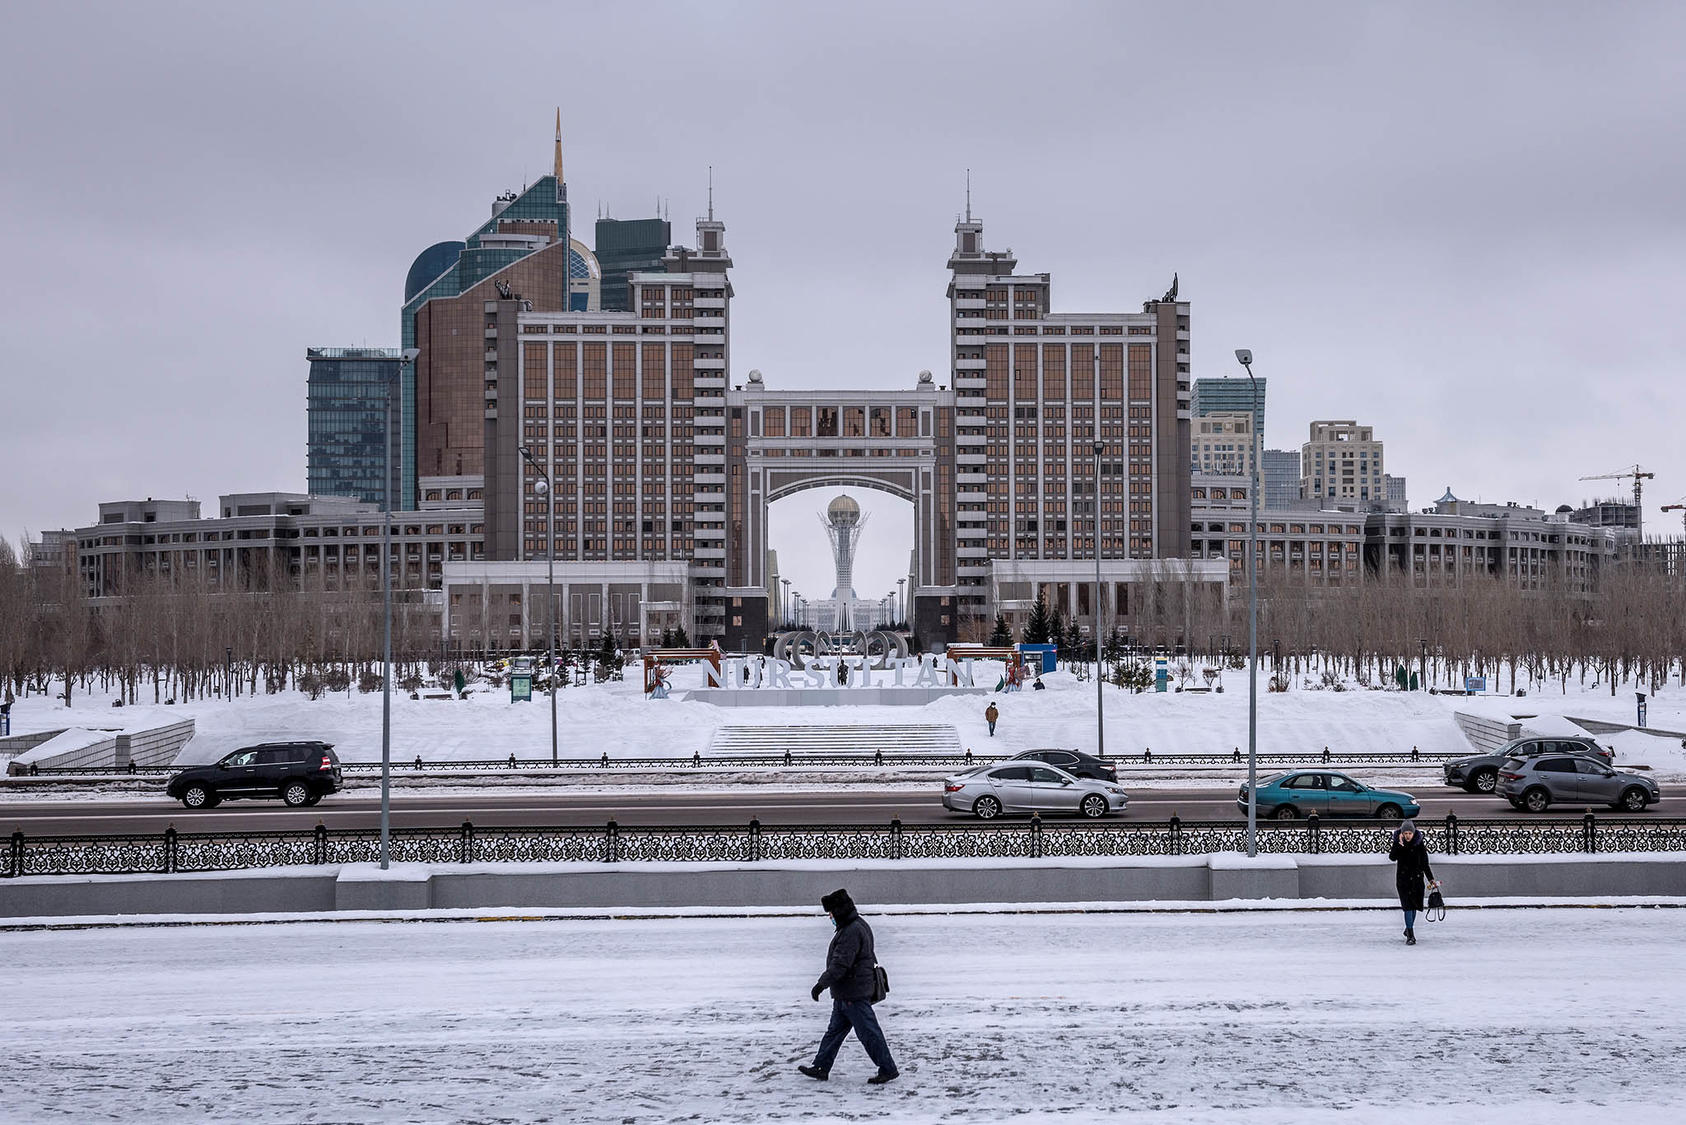 People walk in Nur Sultan, Kazakhstan, on Jan. 18, 2022. Secretary Blinken pledged this week that local companies impacted by Western sanctions on Russia would be compensated by the United States. (Sergey Ponomarev/The New York Times)